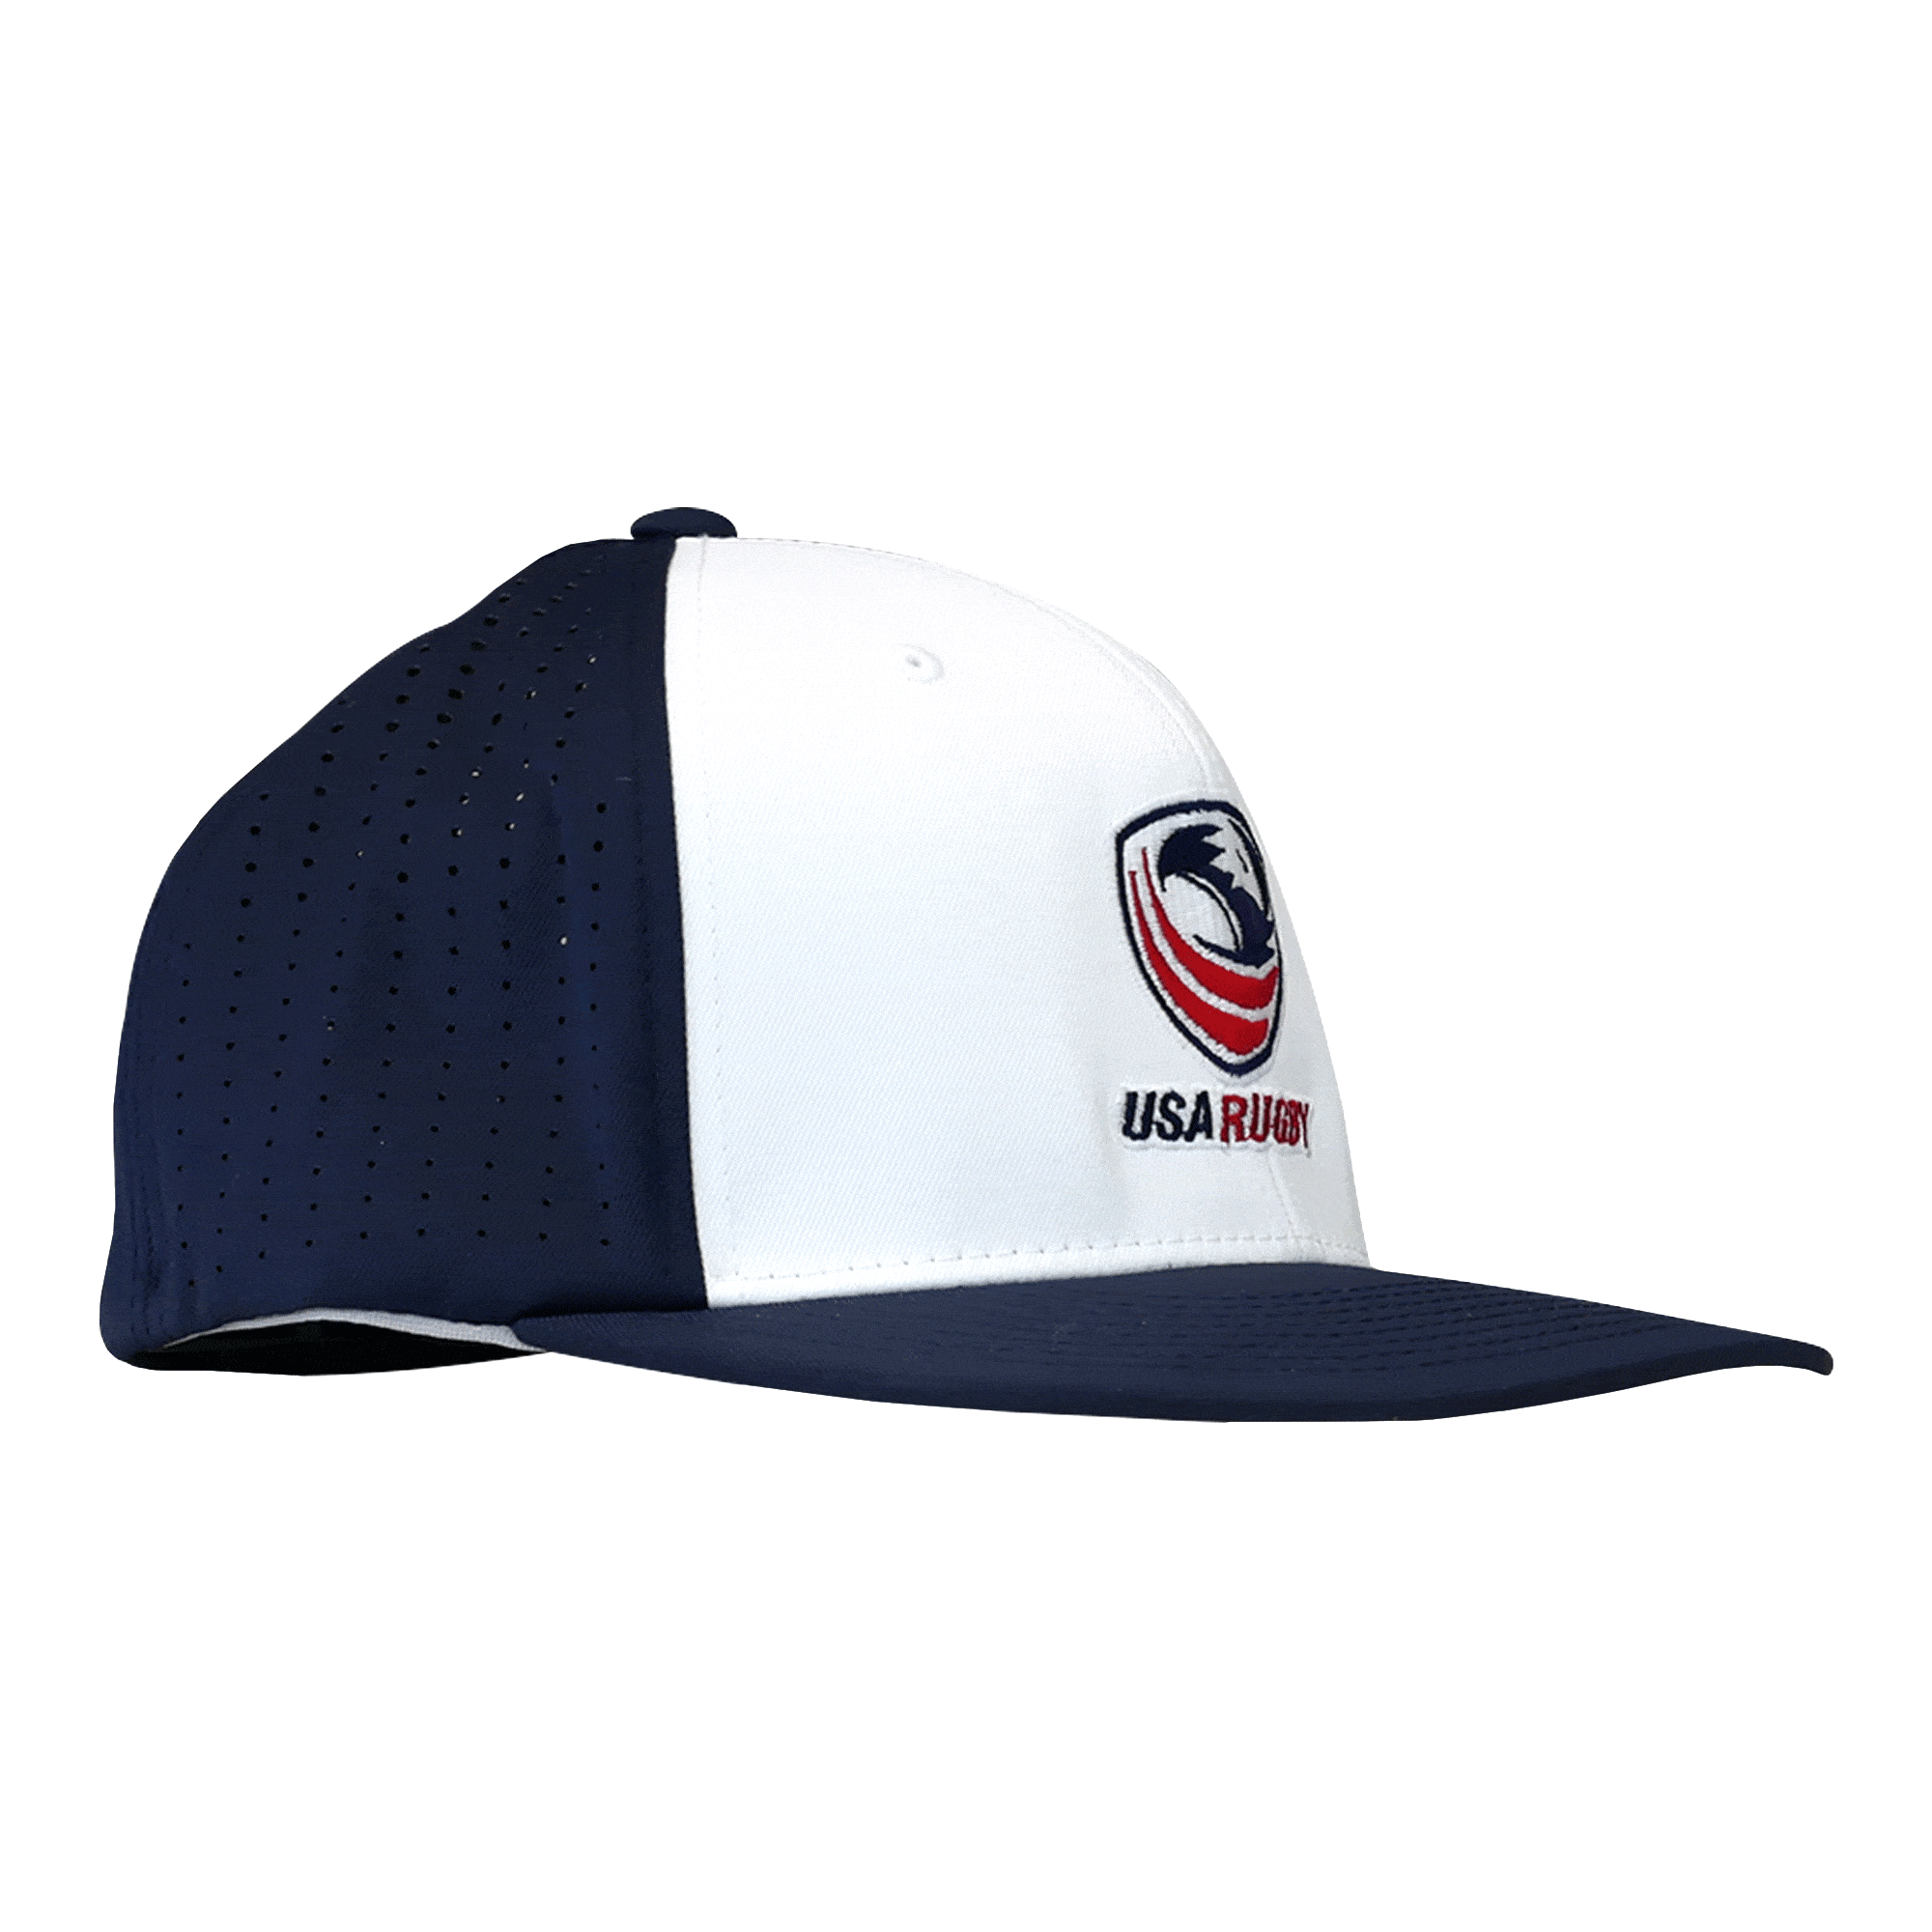 USA Rugby Performance - Perforated World Rugby Cap Shop Flexfit